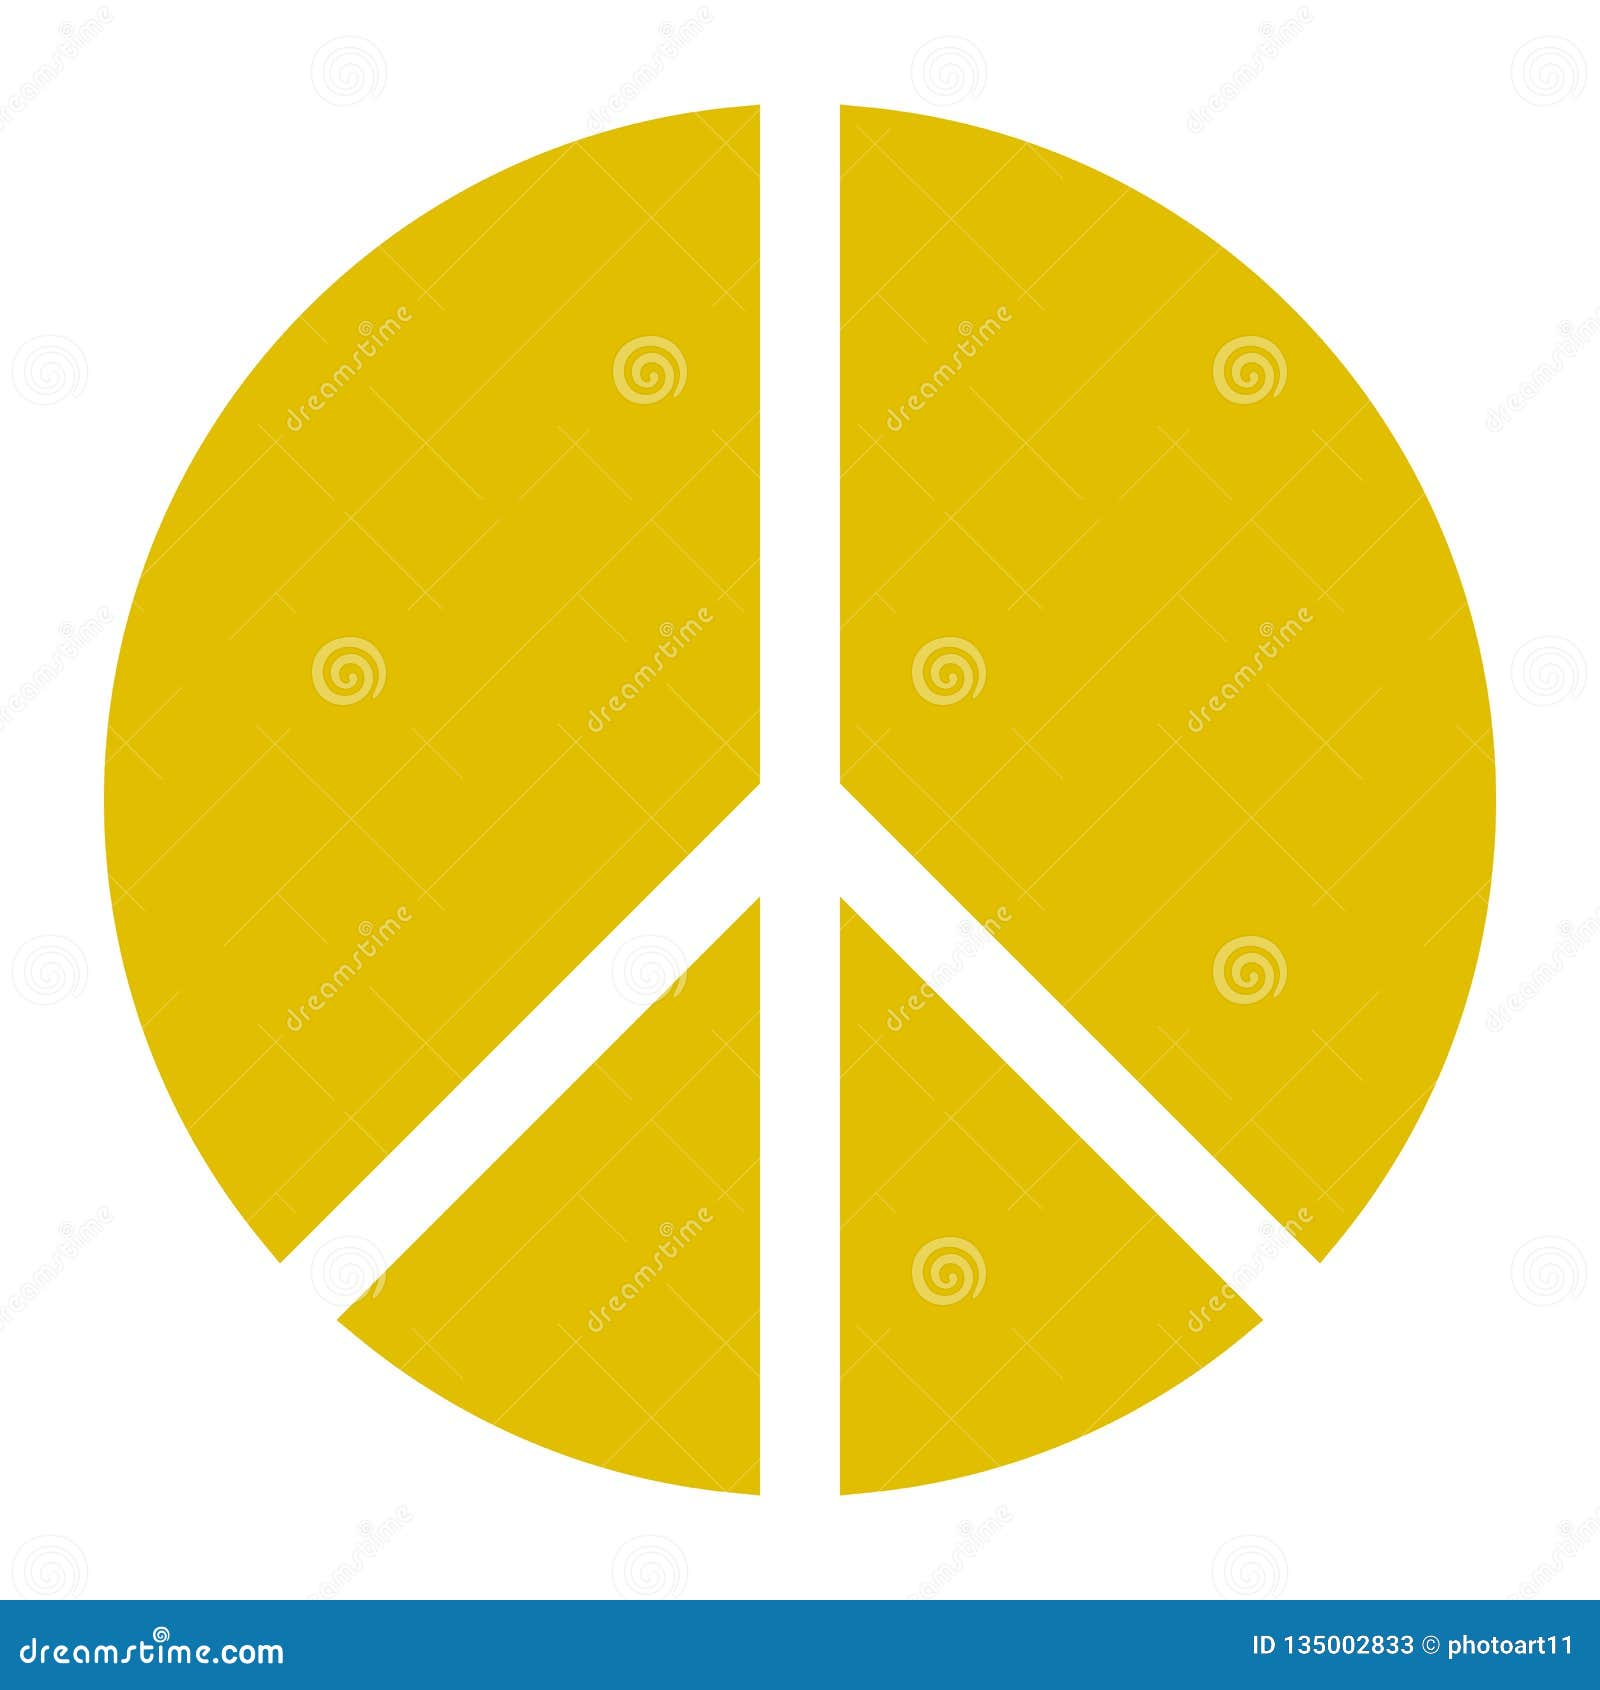 Peace Symbol Icon - Golden Simple, Segmented Shapes, Isolated - Vector ...